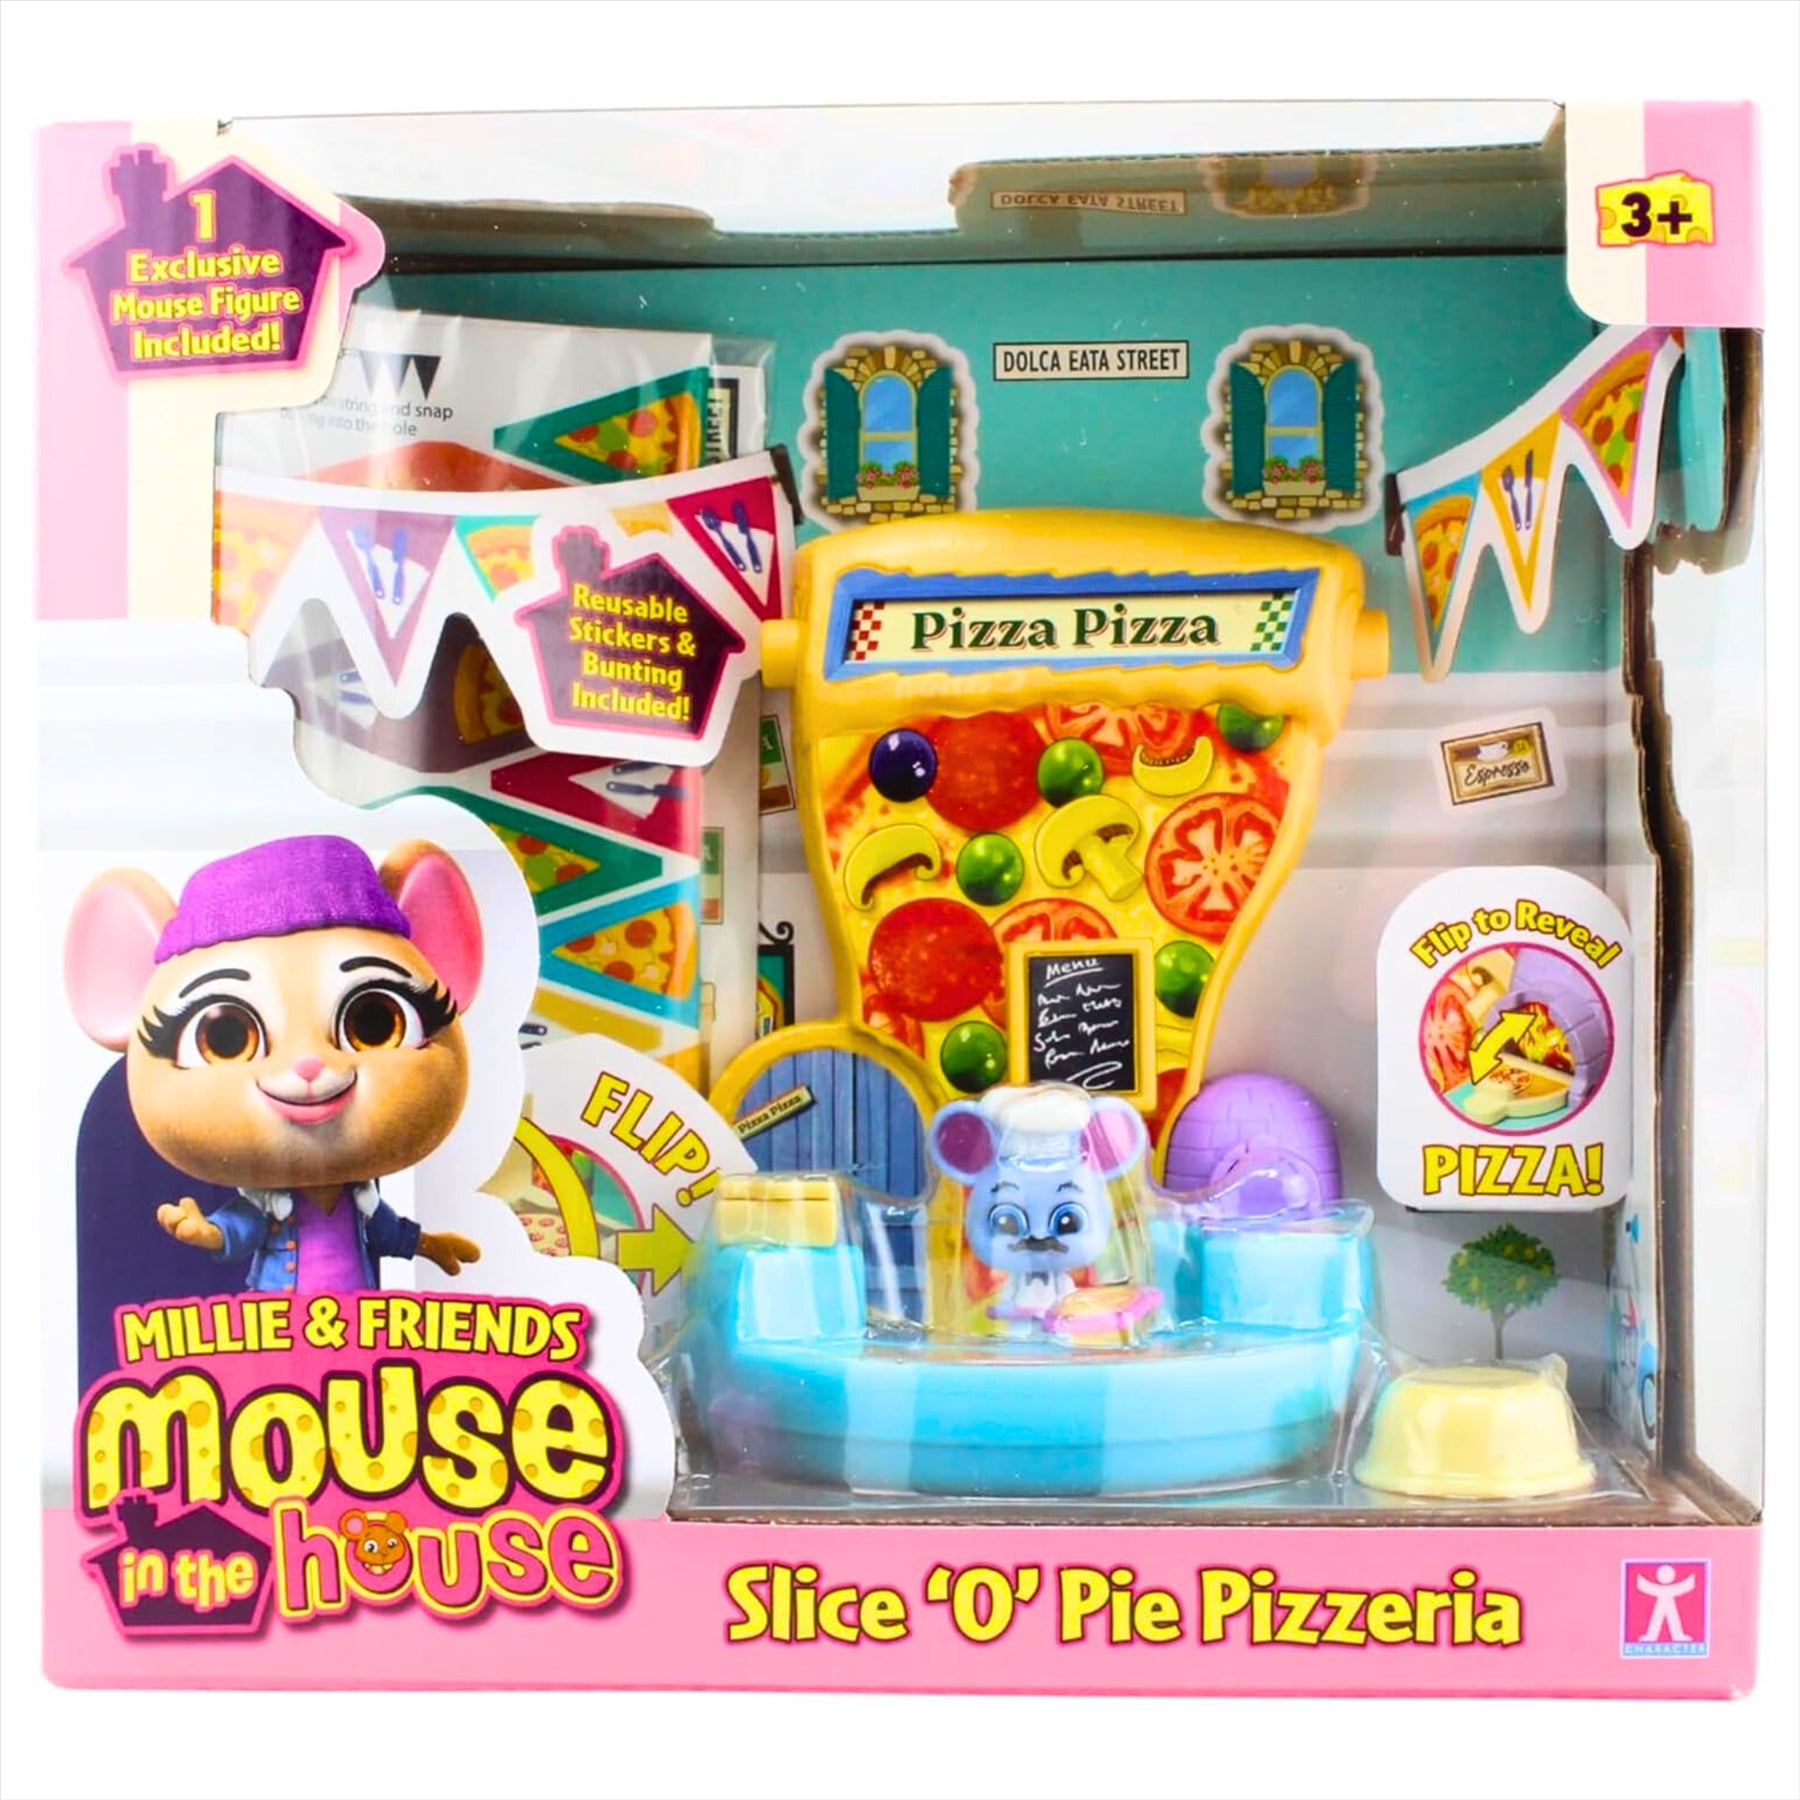 Millie and Friends Mouse in the House Mega Bundle - Red Apple School Playset, Slice 'O' Pie Pizzeria Playset, and 5x Collectable Mouse Figure Packs - Toptoys2u